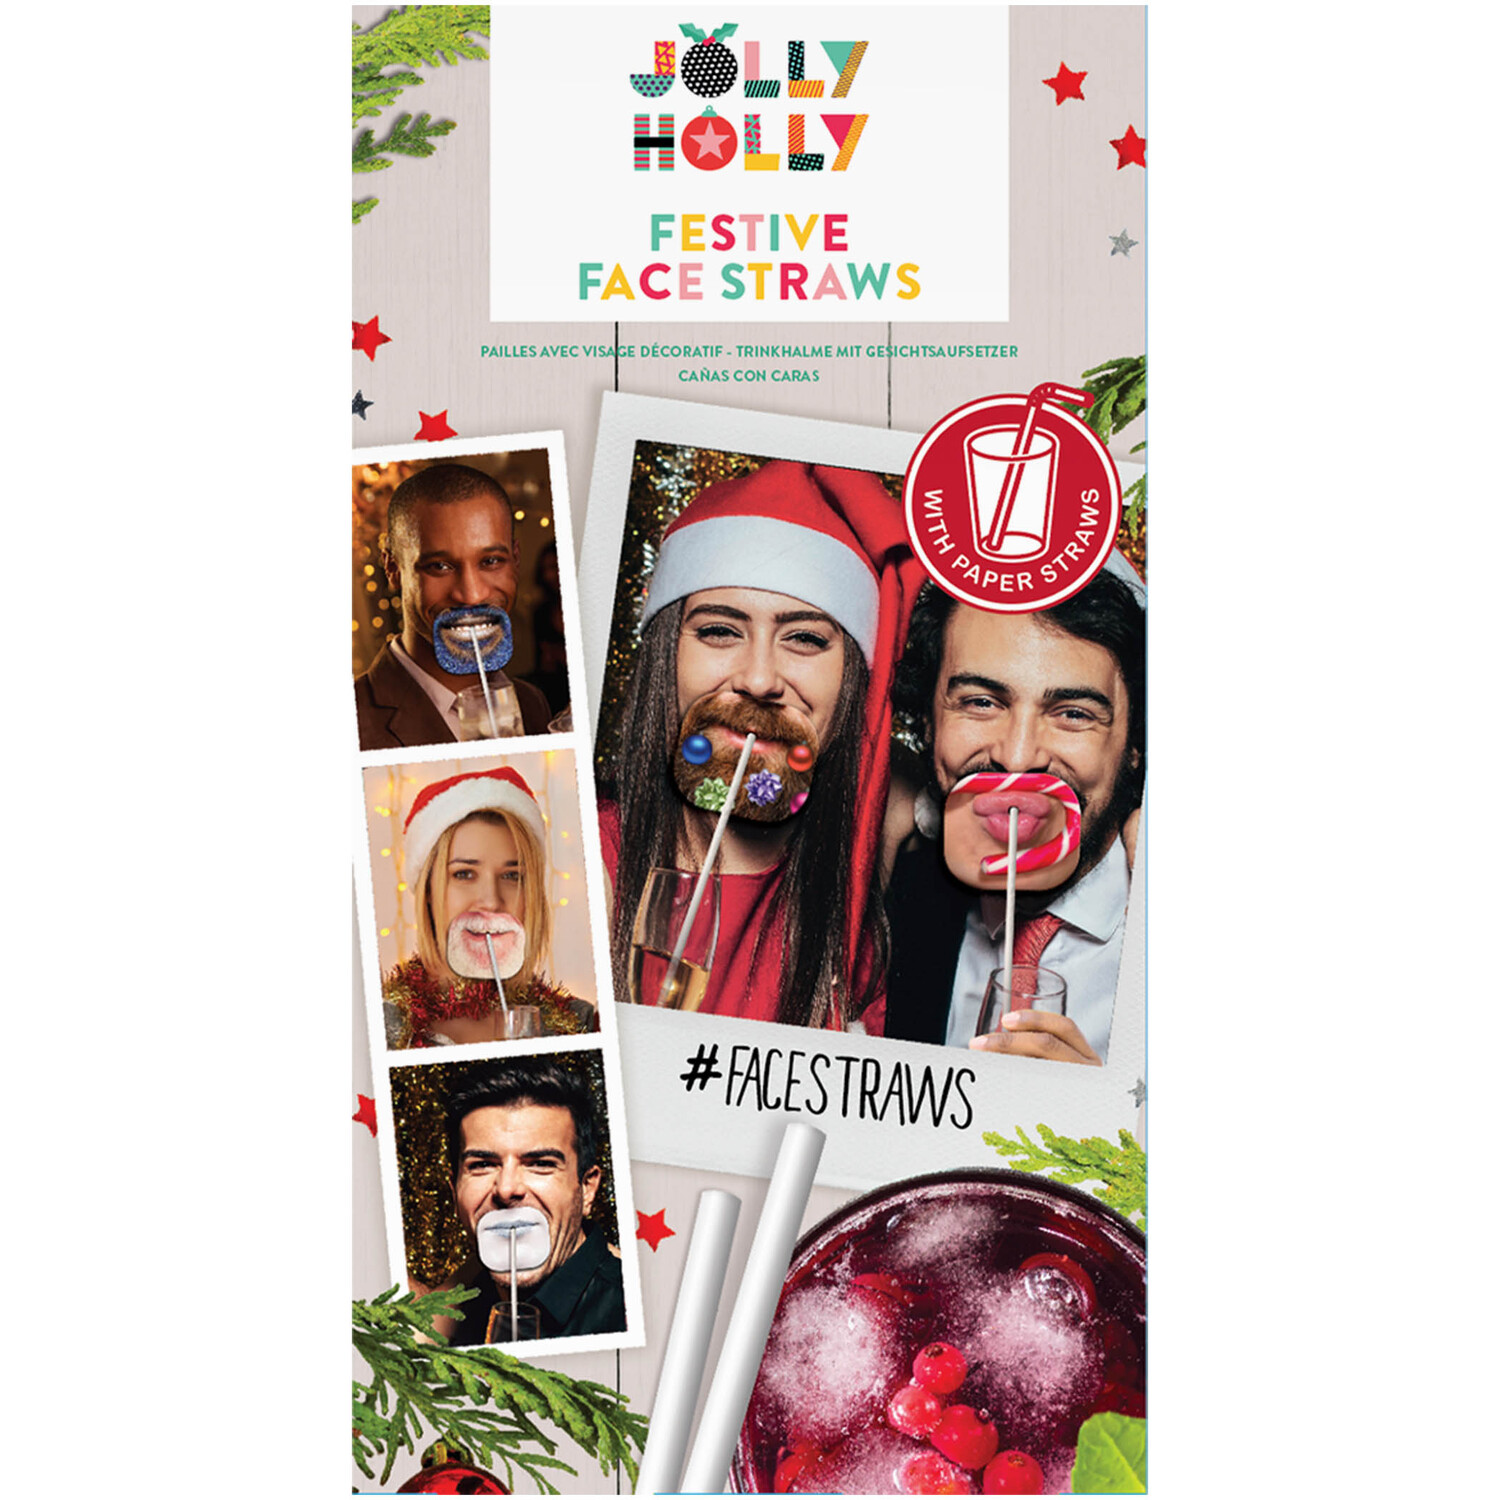 Jolly Holly Festive Face Straw 10 Pack Image 1